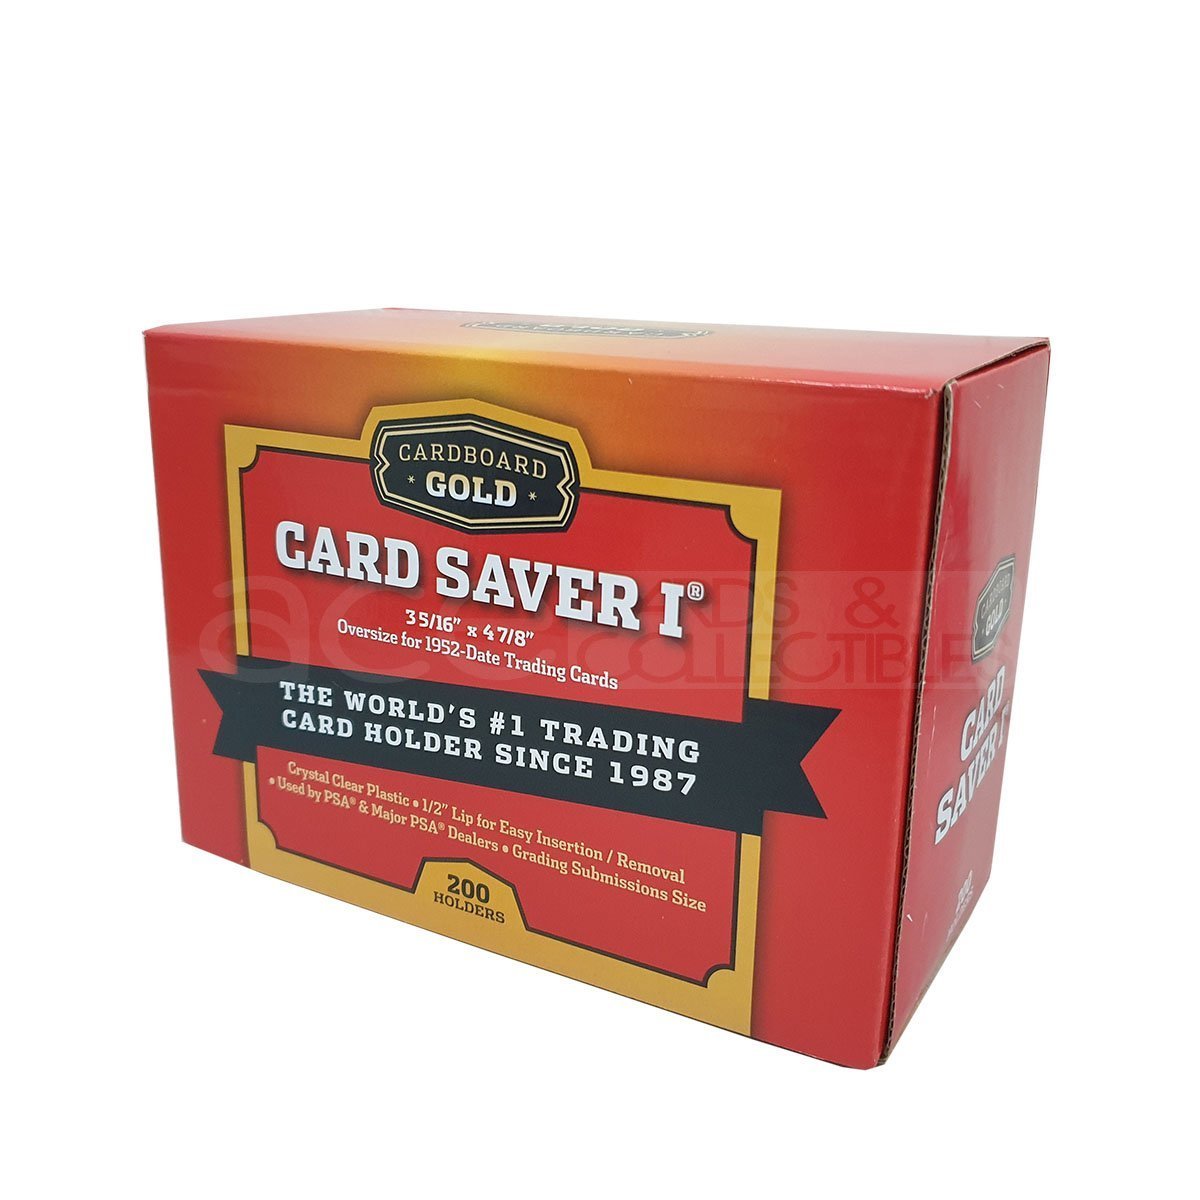 Cardboard Gold &quot;Card Saver 1&quot; Semi-Rigid Card Holder [ Pack / Box ]-One Box-Clear 200pcs-Cardboard Gold-Ace Cards &amp; Collectibles